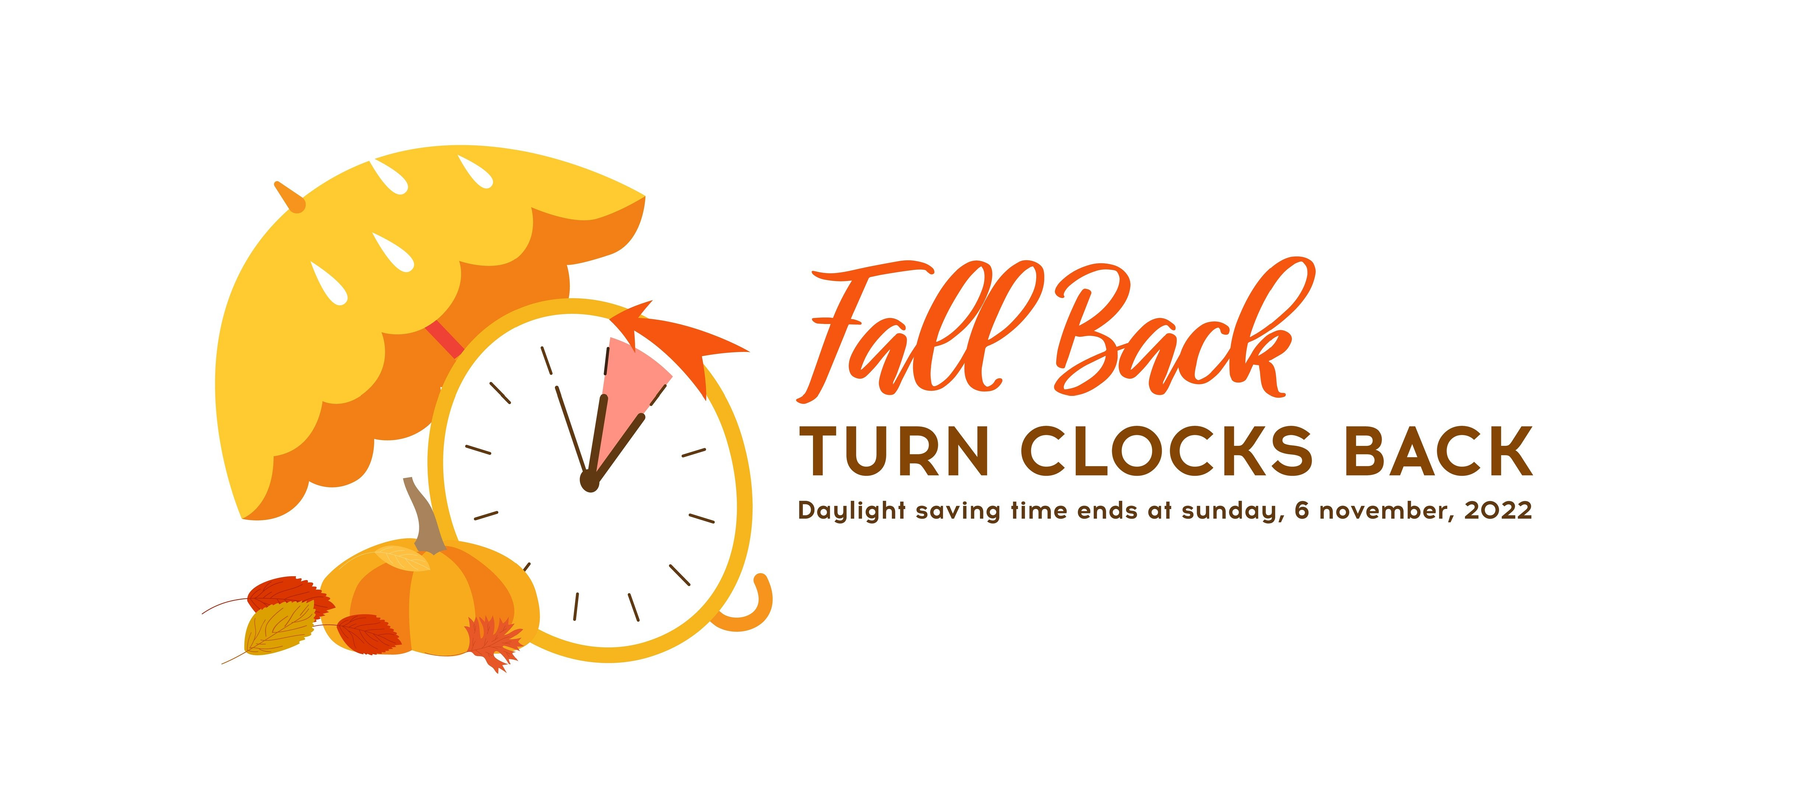 The Daylight-Saving Time Debate - Is It Good or Bad?